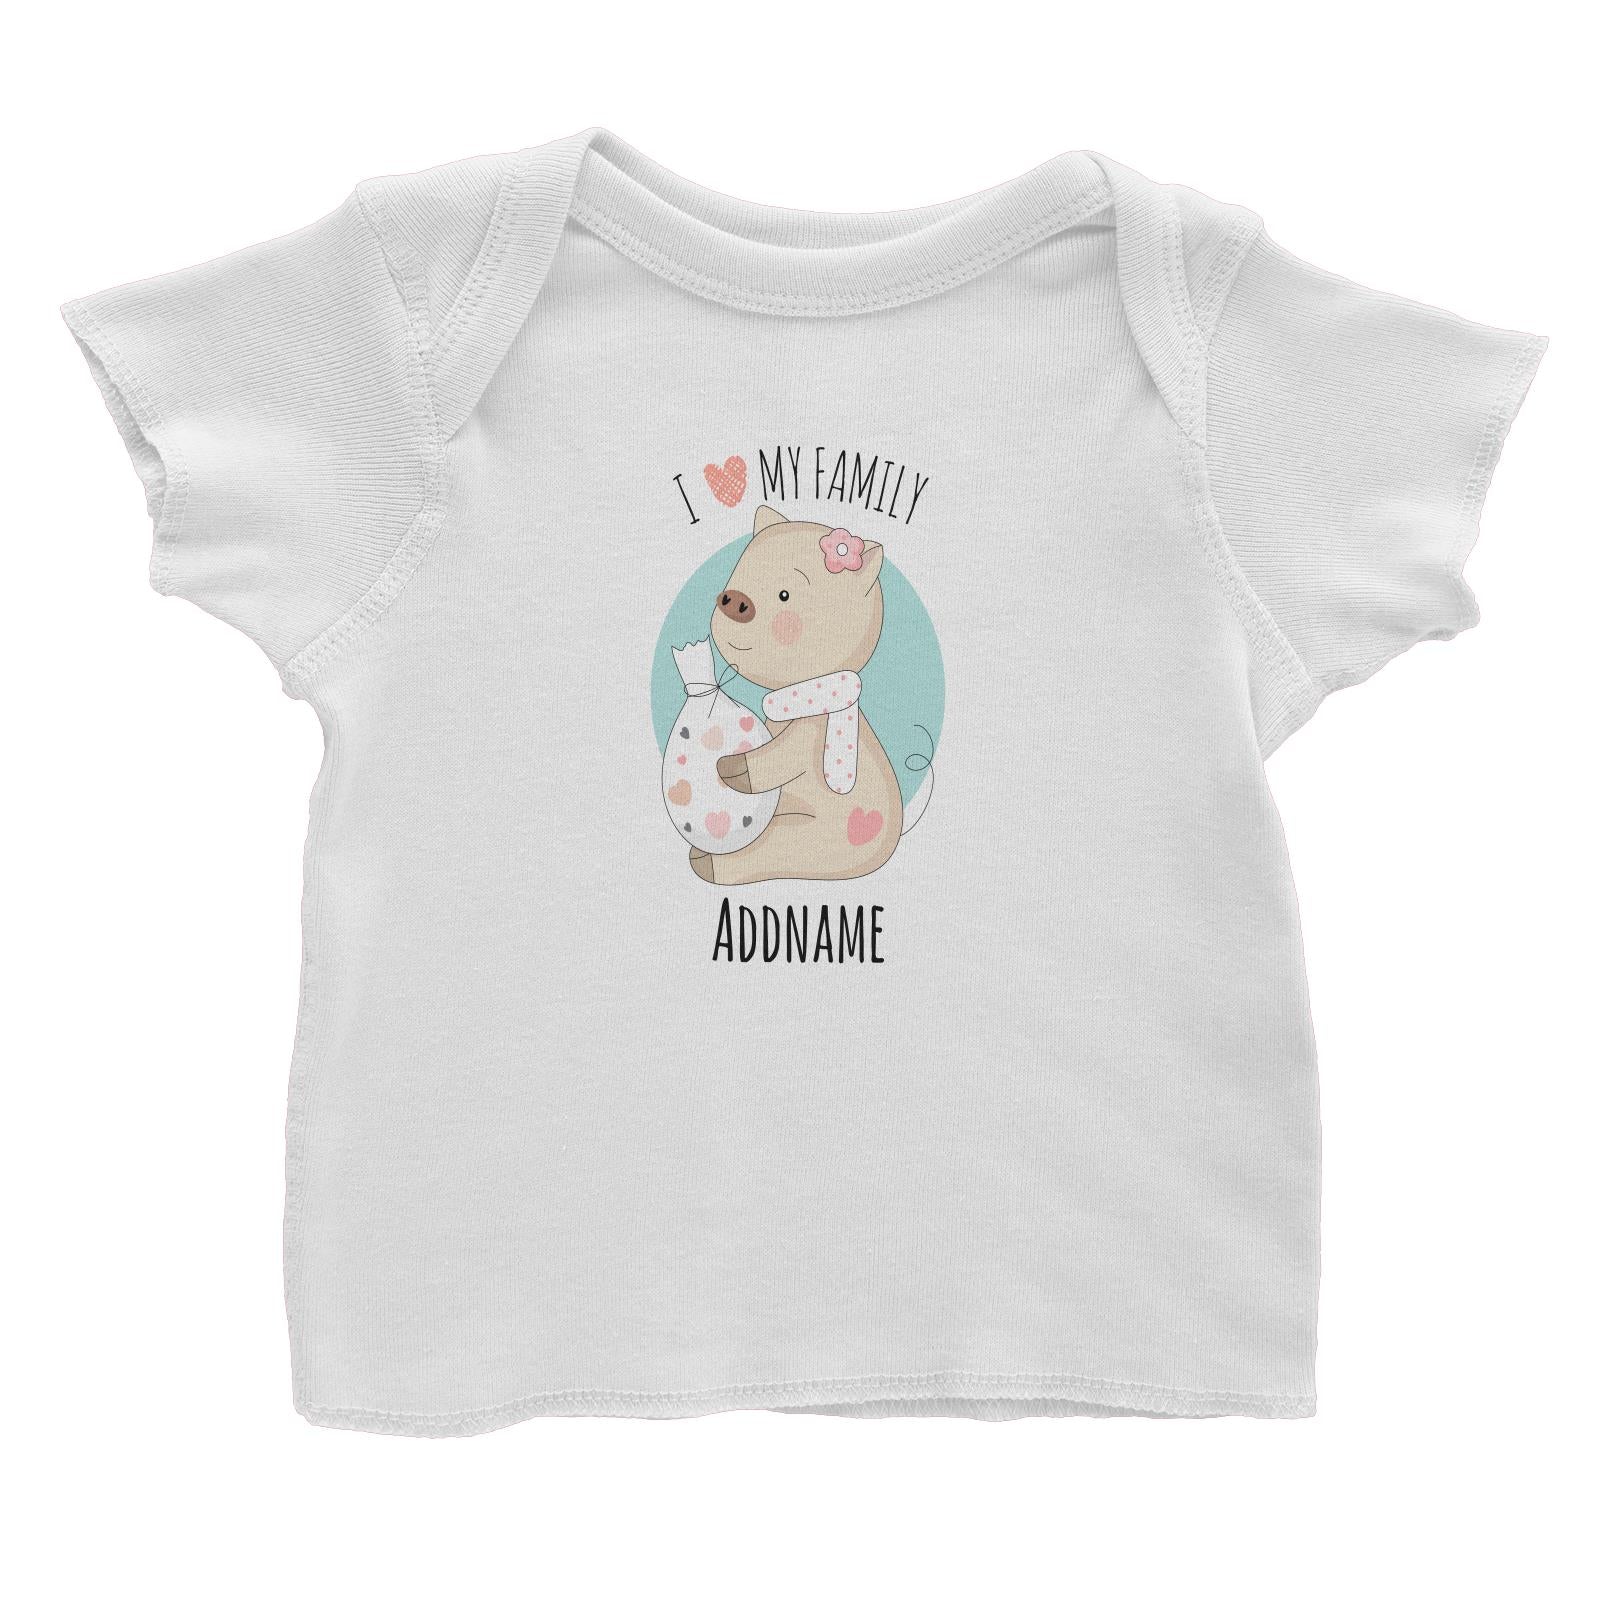 Sweet Animals Sketches Pig I Love My Family Addname Baby T-Shirt